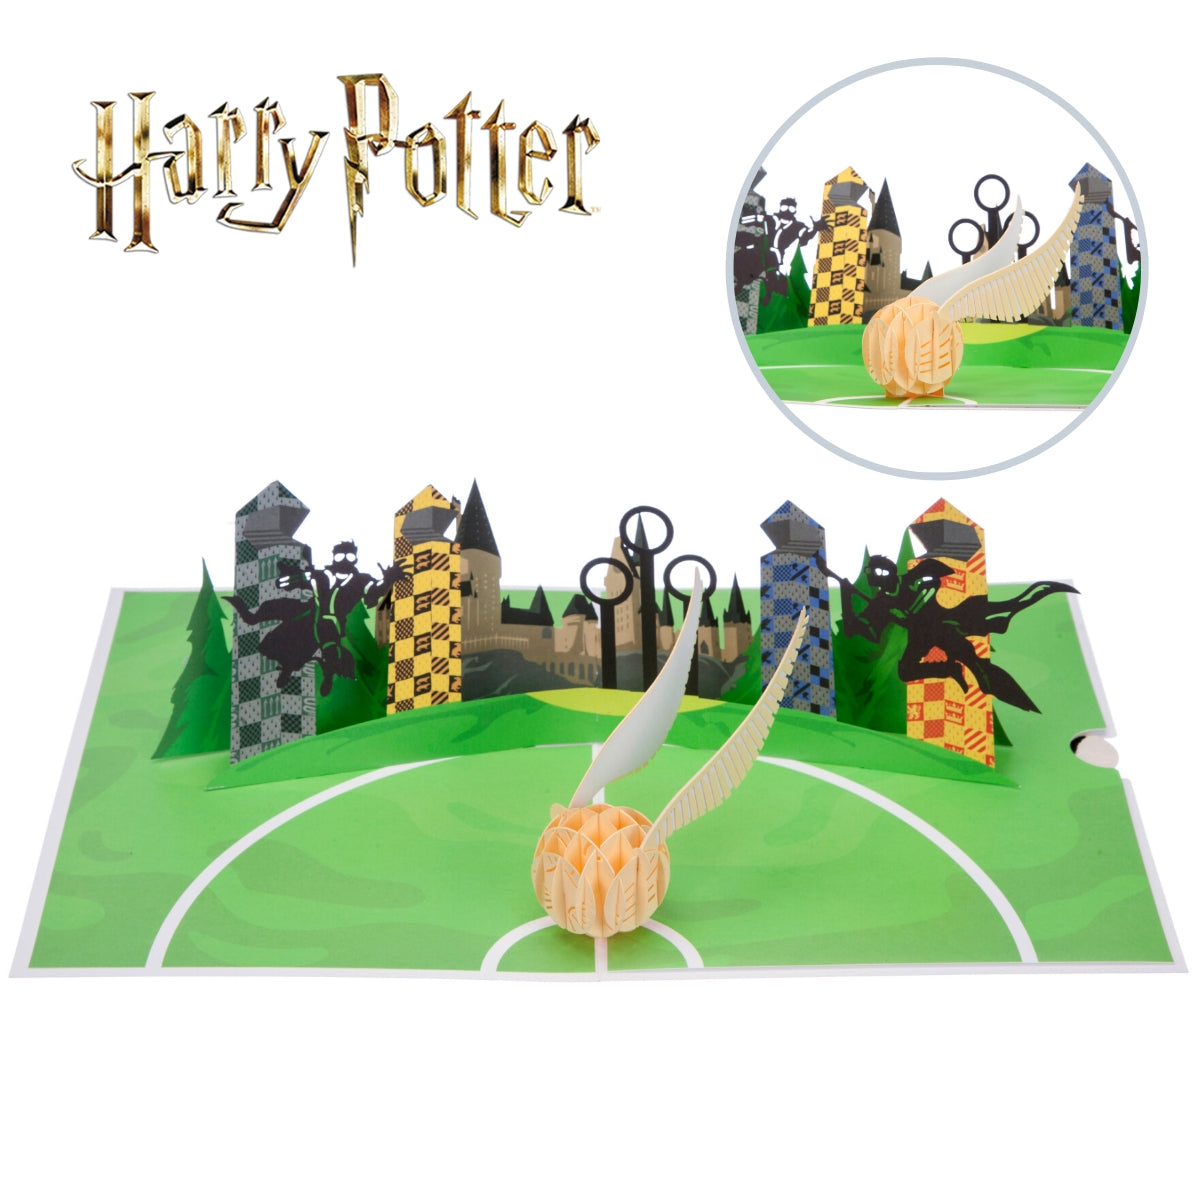 Harry Potter Birthday Card - Golden Snitch Pop Up Card Close Up Image